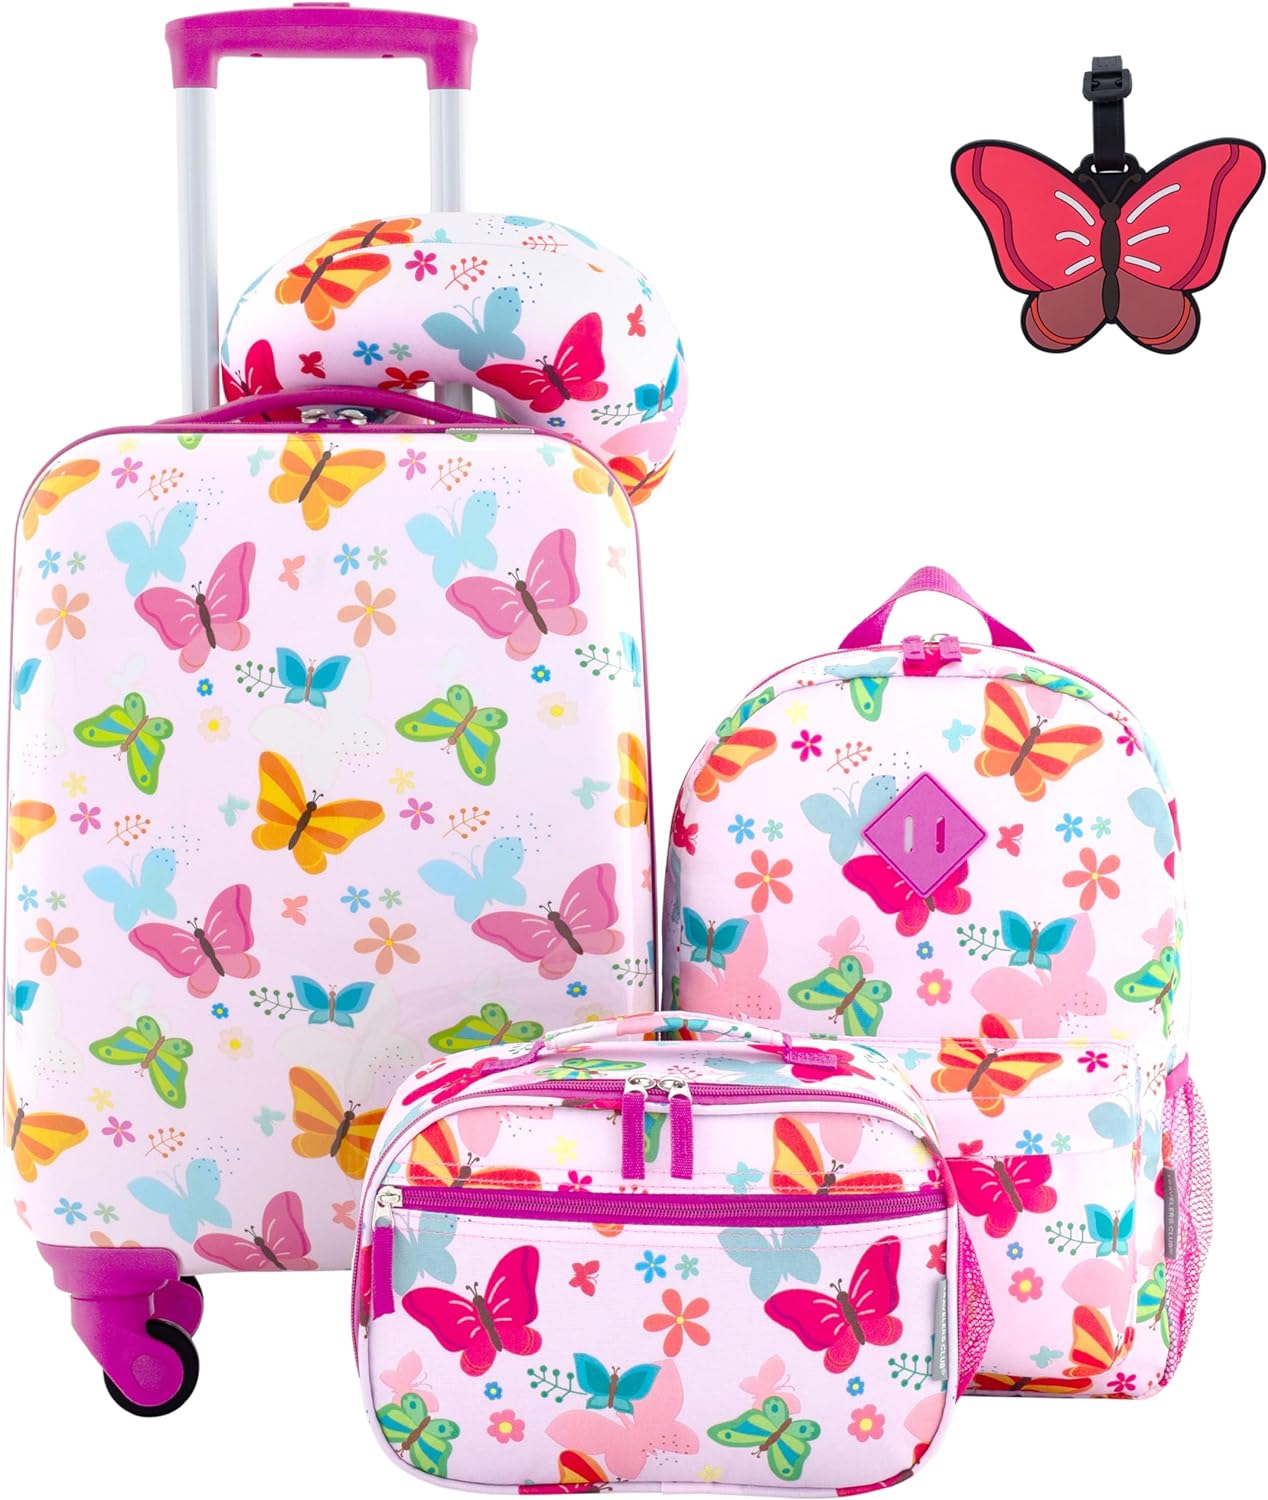 2. The Five Piece Luggage Set